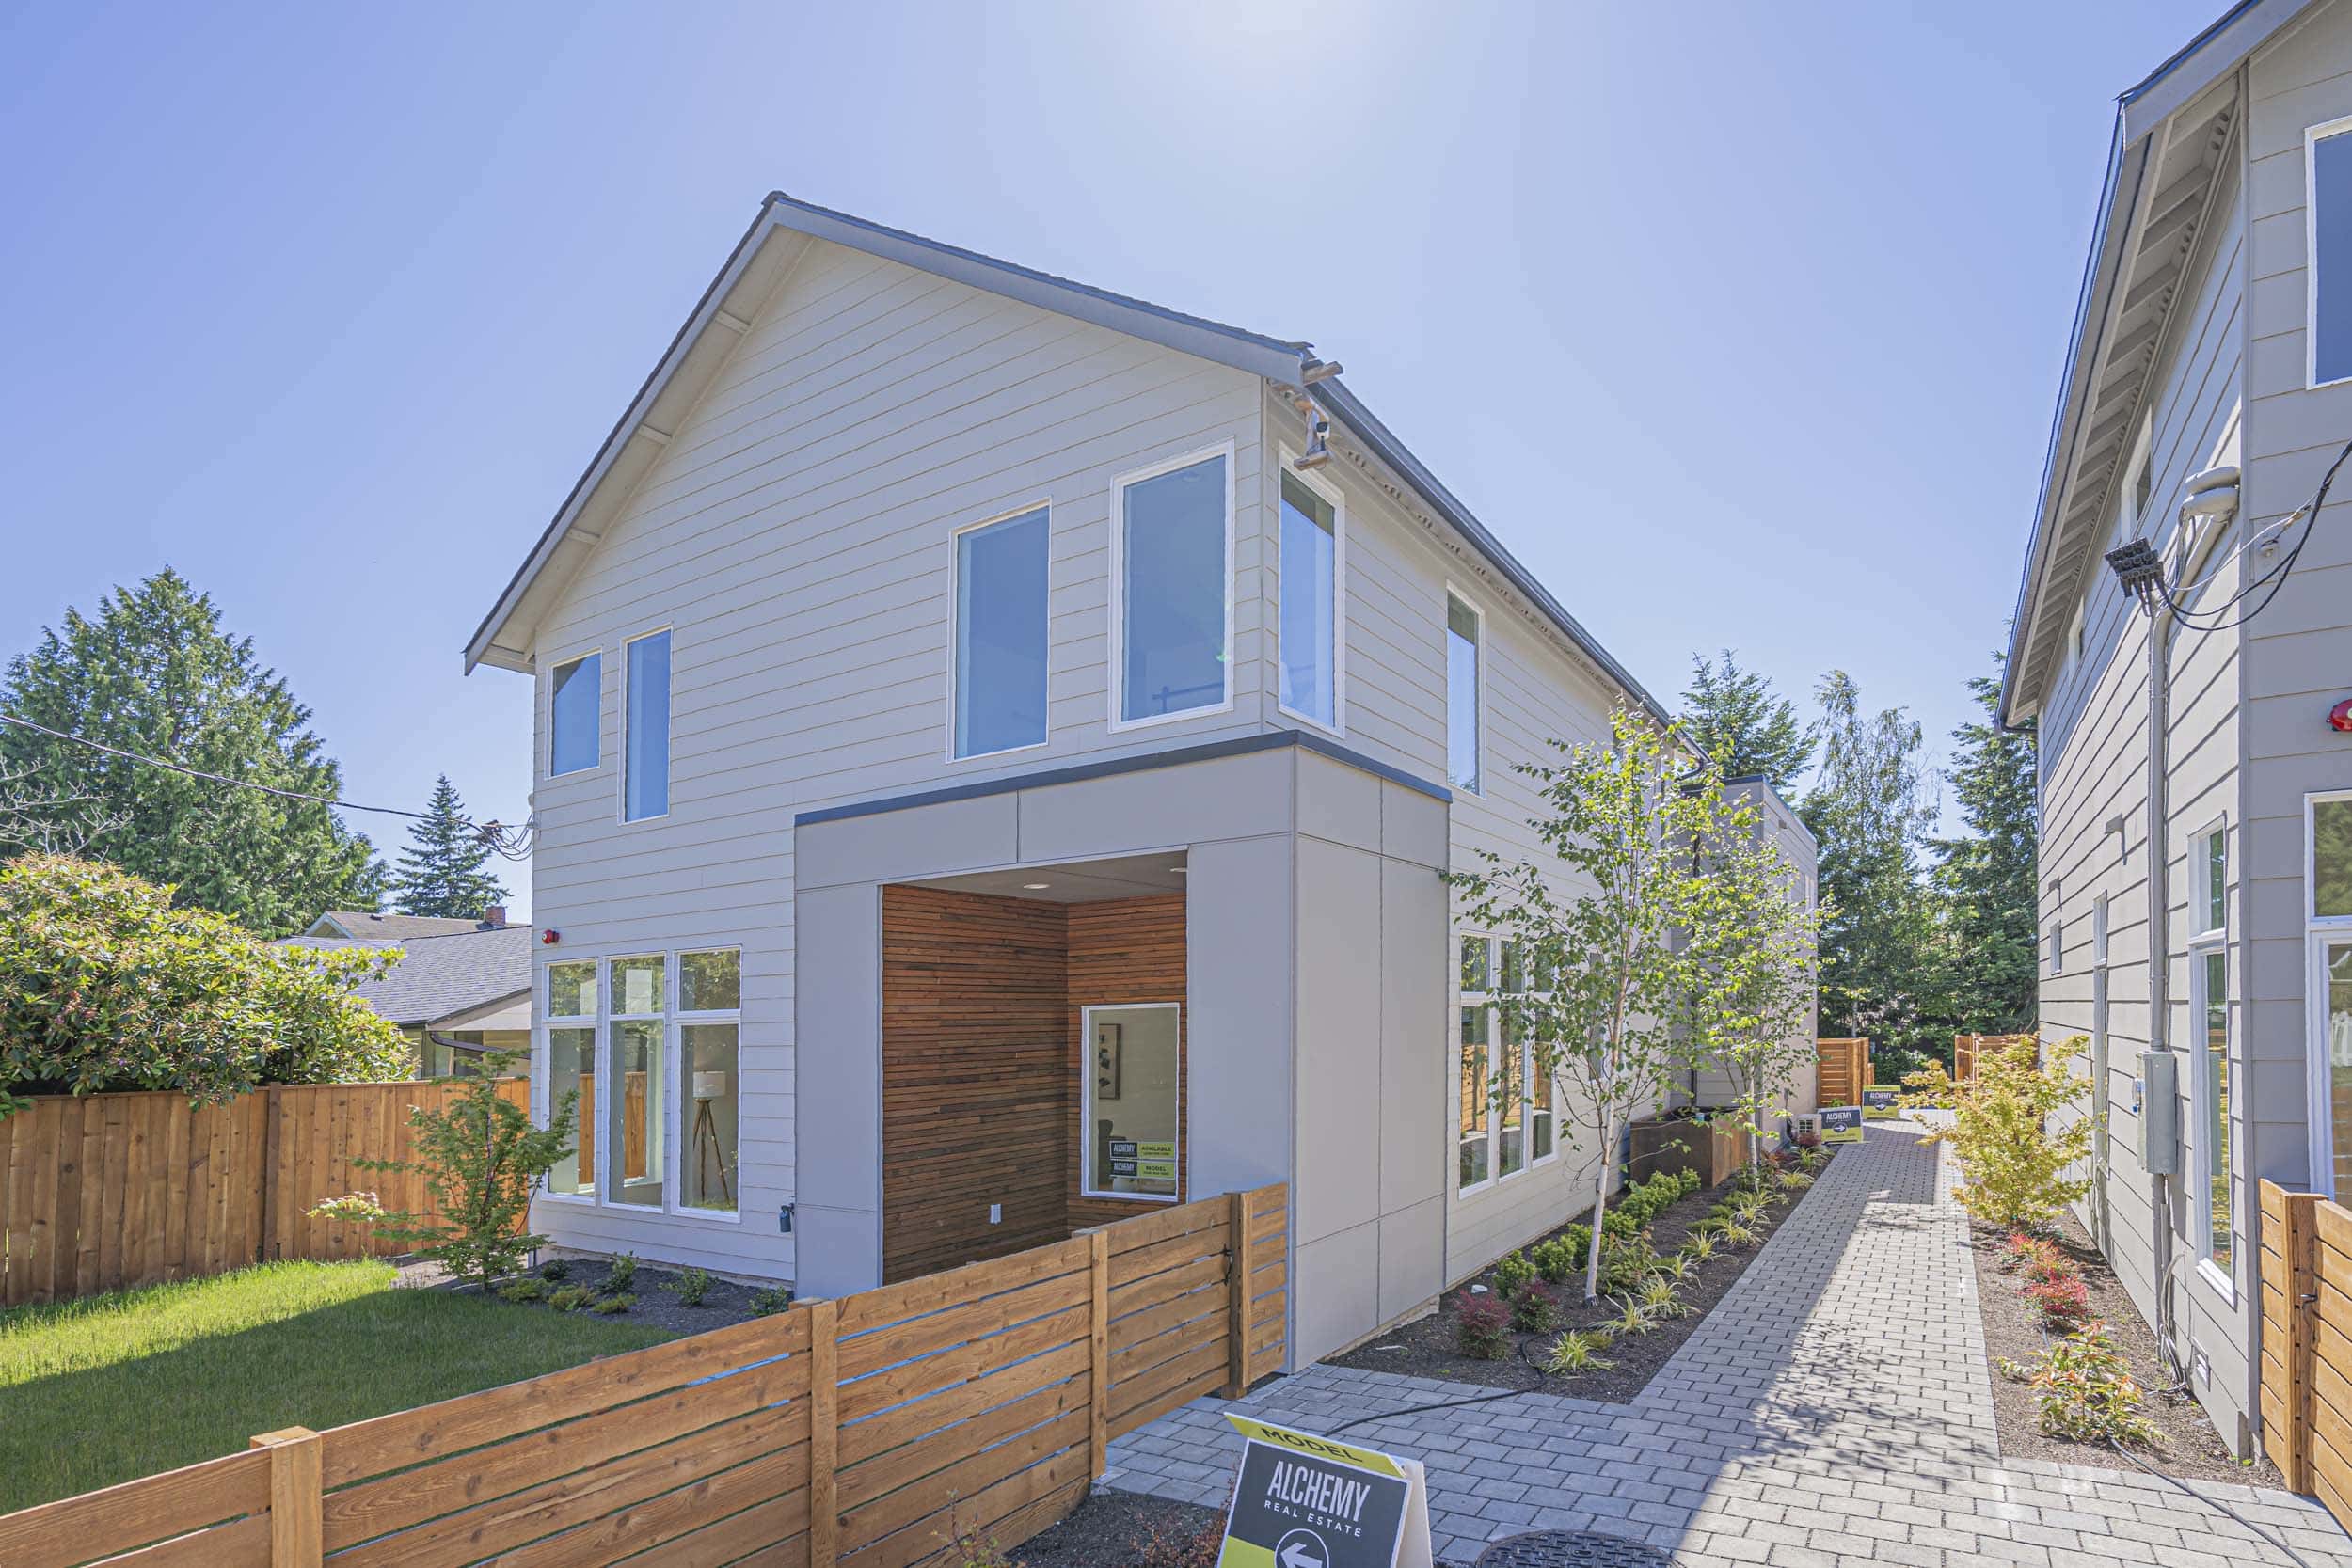 New Home Construction Seattle - Single Family Residence located at 10217 40th Ave SW, Seattle WA 98146